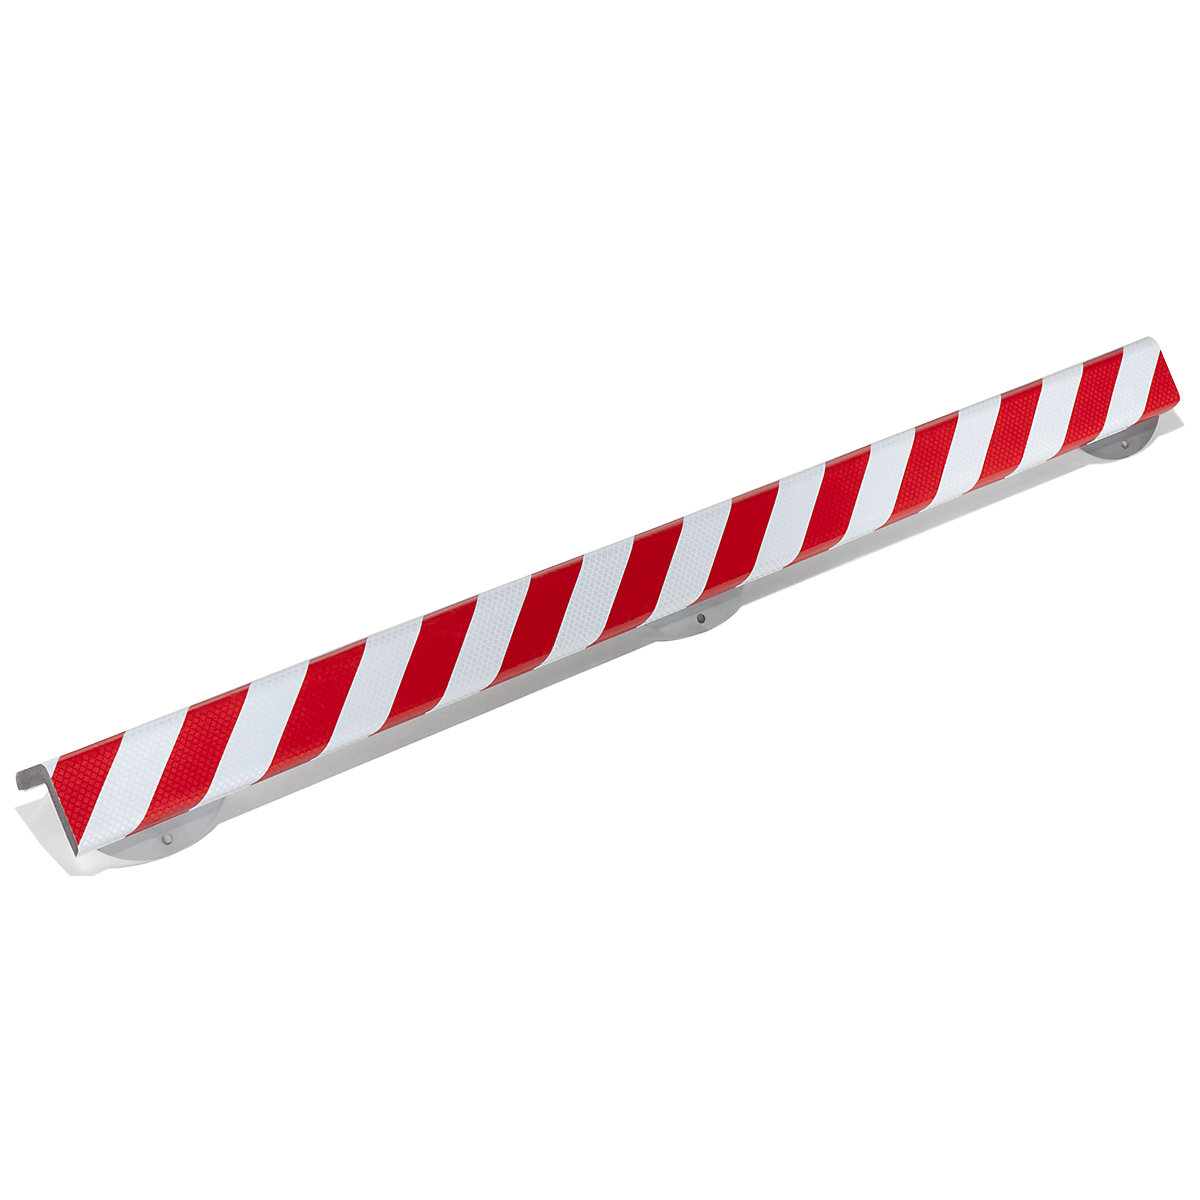 Knuffi® corner protection with mounting rail – SHG, type H+, 1 m piece, red / white retroreflective-11